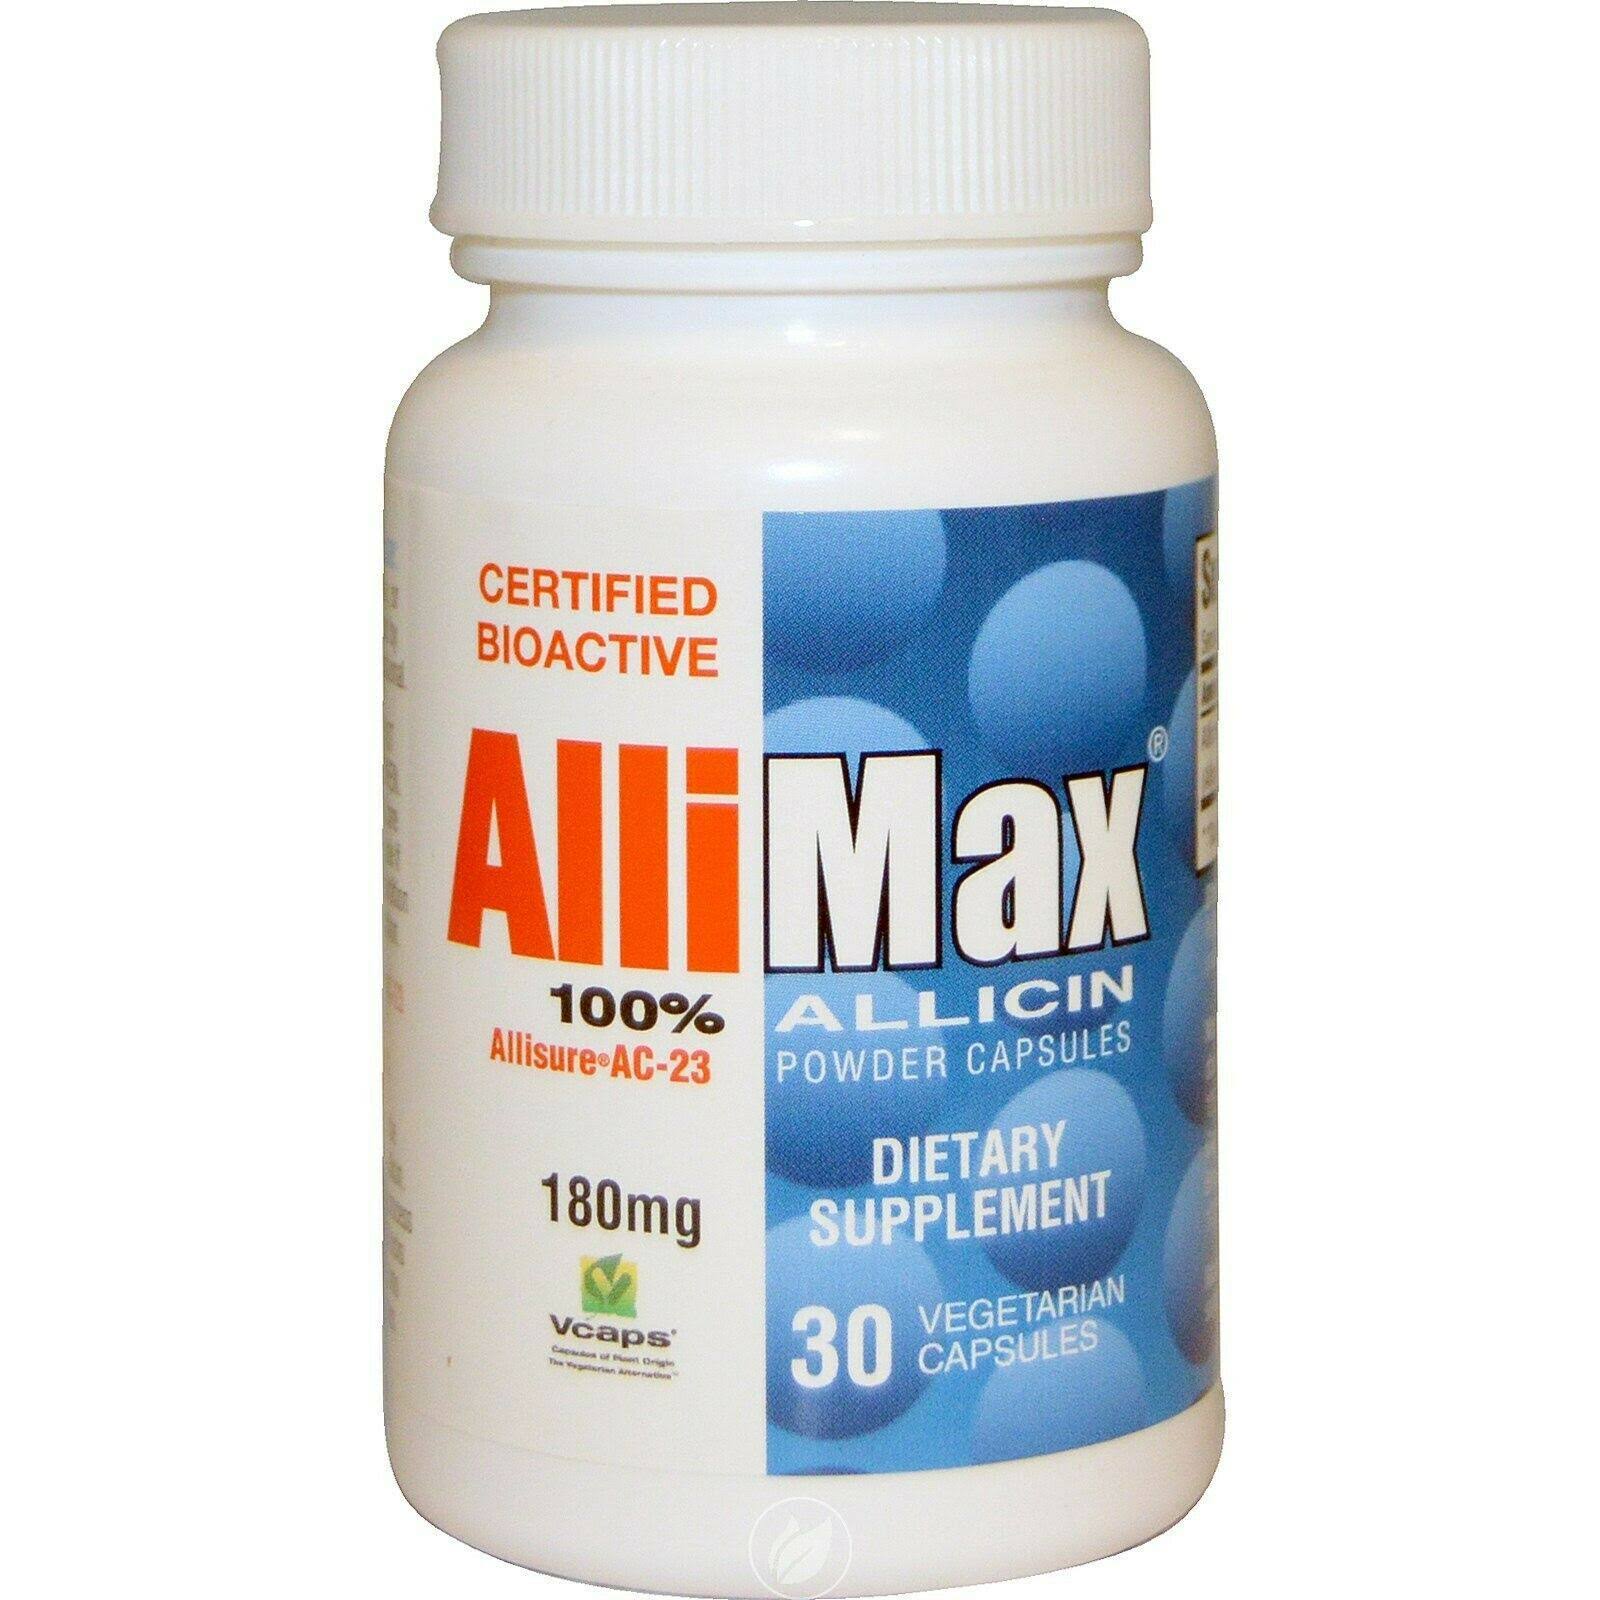 Allimax 100 Allicin Powder Capsules Dietary Supplement - 180mg, 30ct